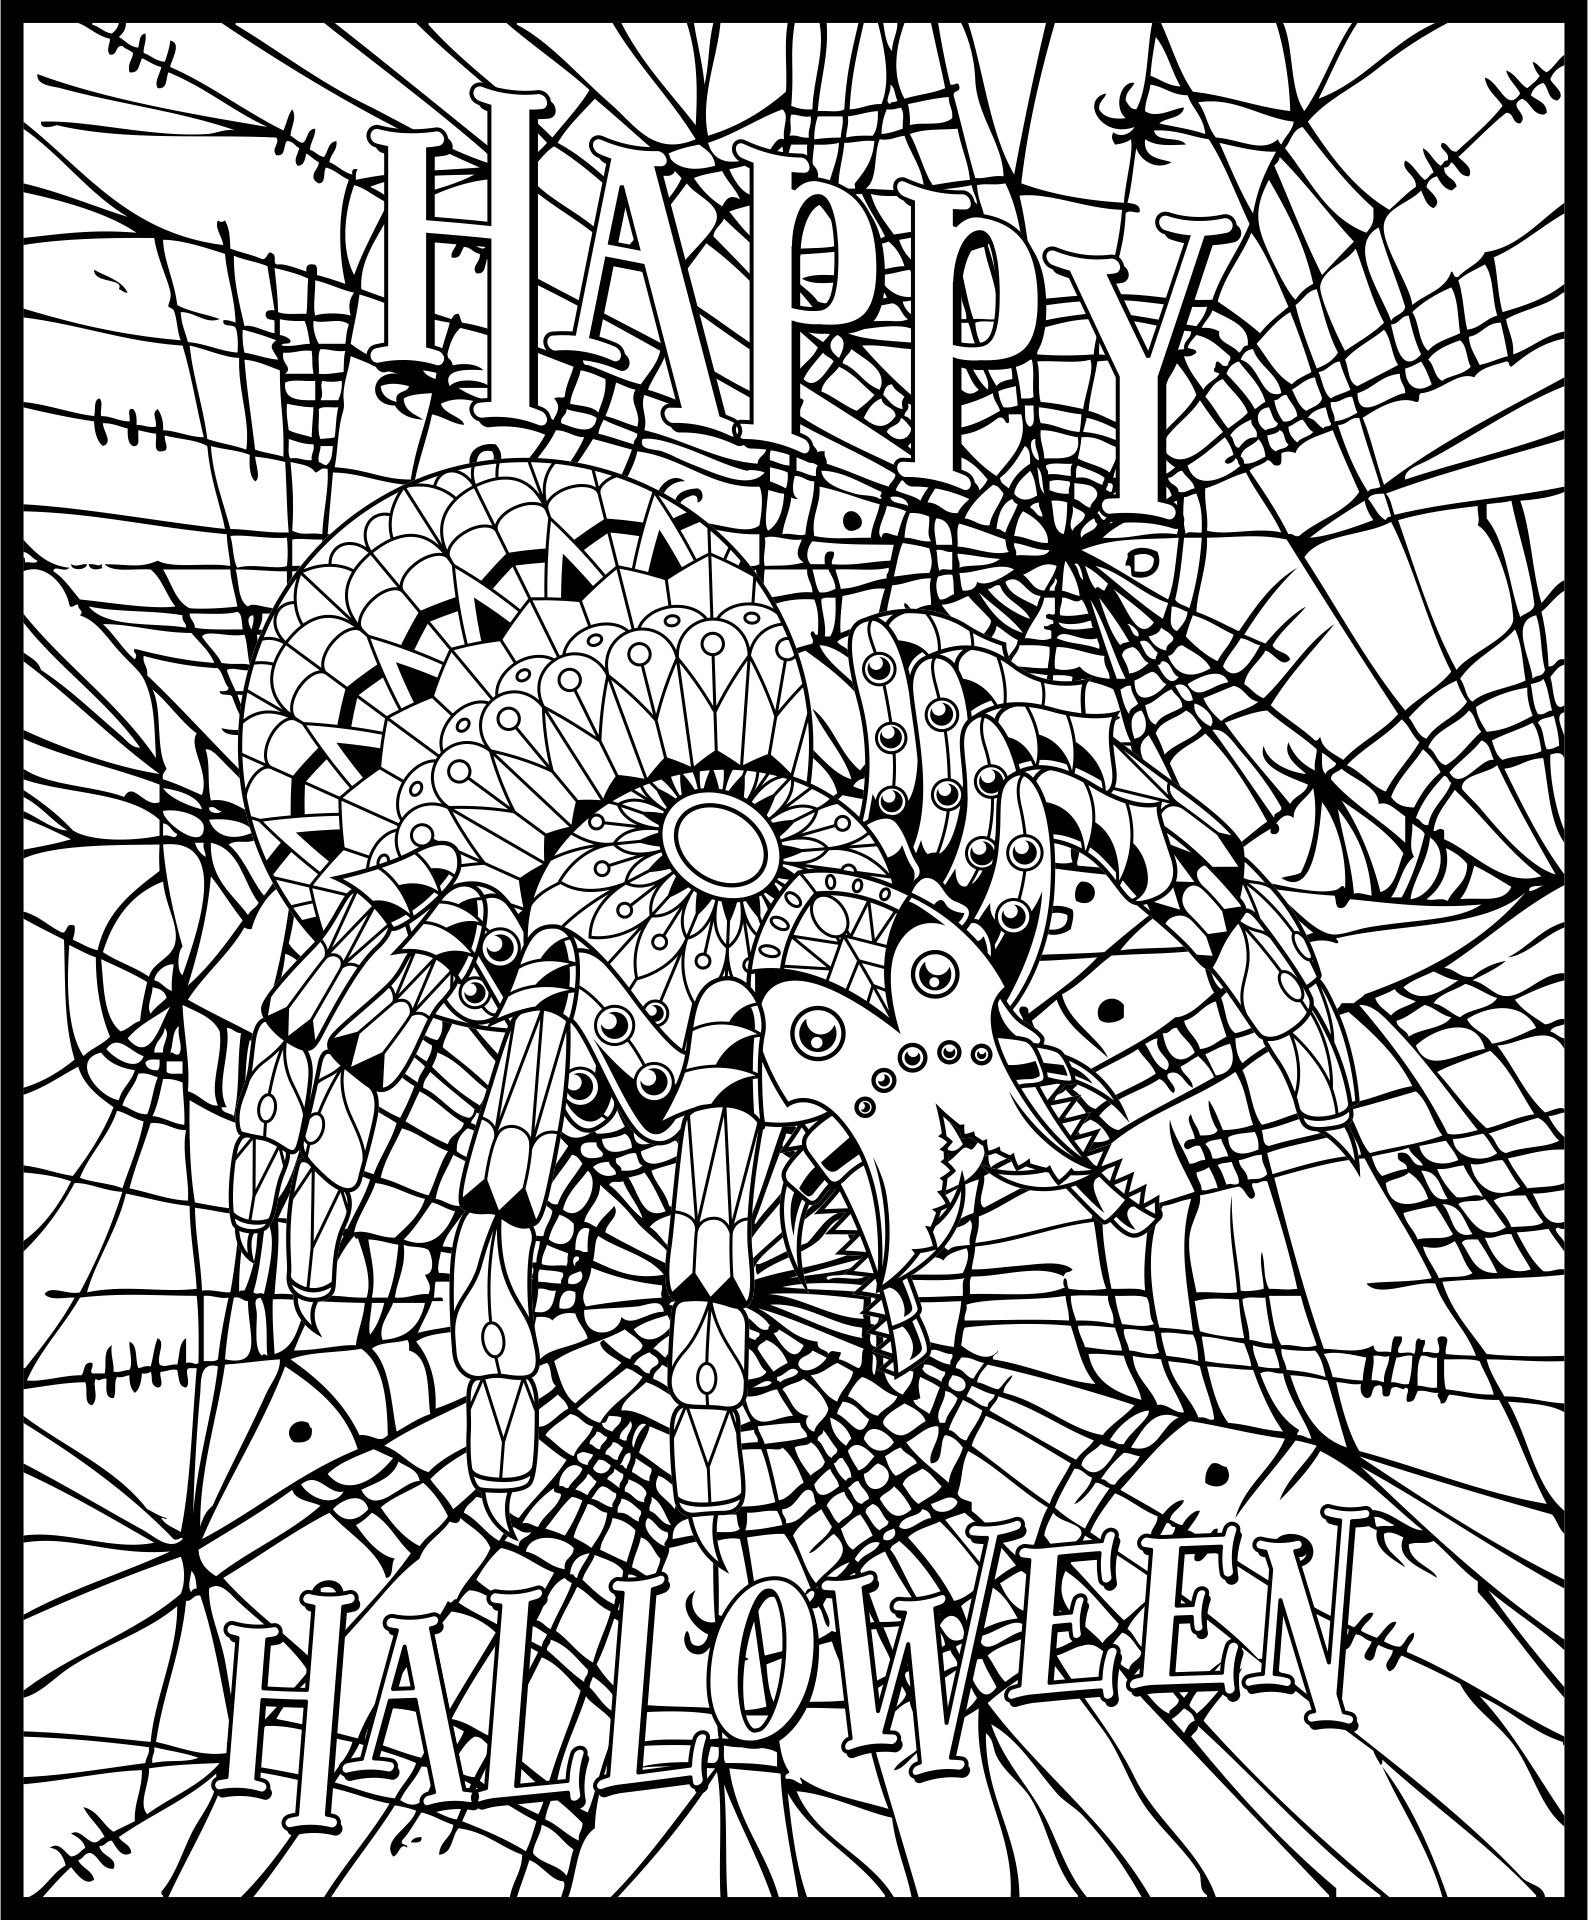 Halloween Coloring Pages For Adults - 15 Free PDF Printables | Printablee